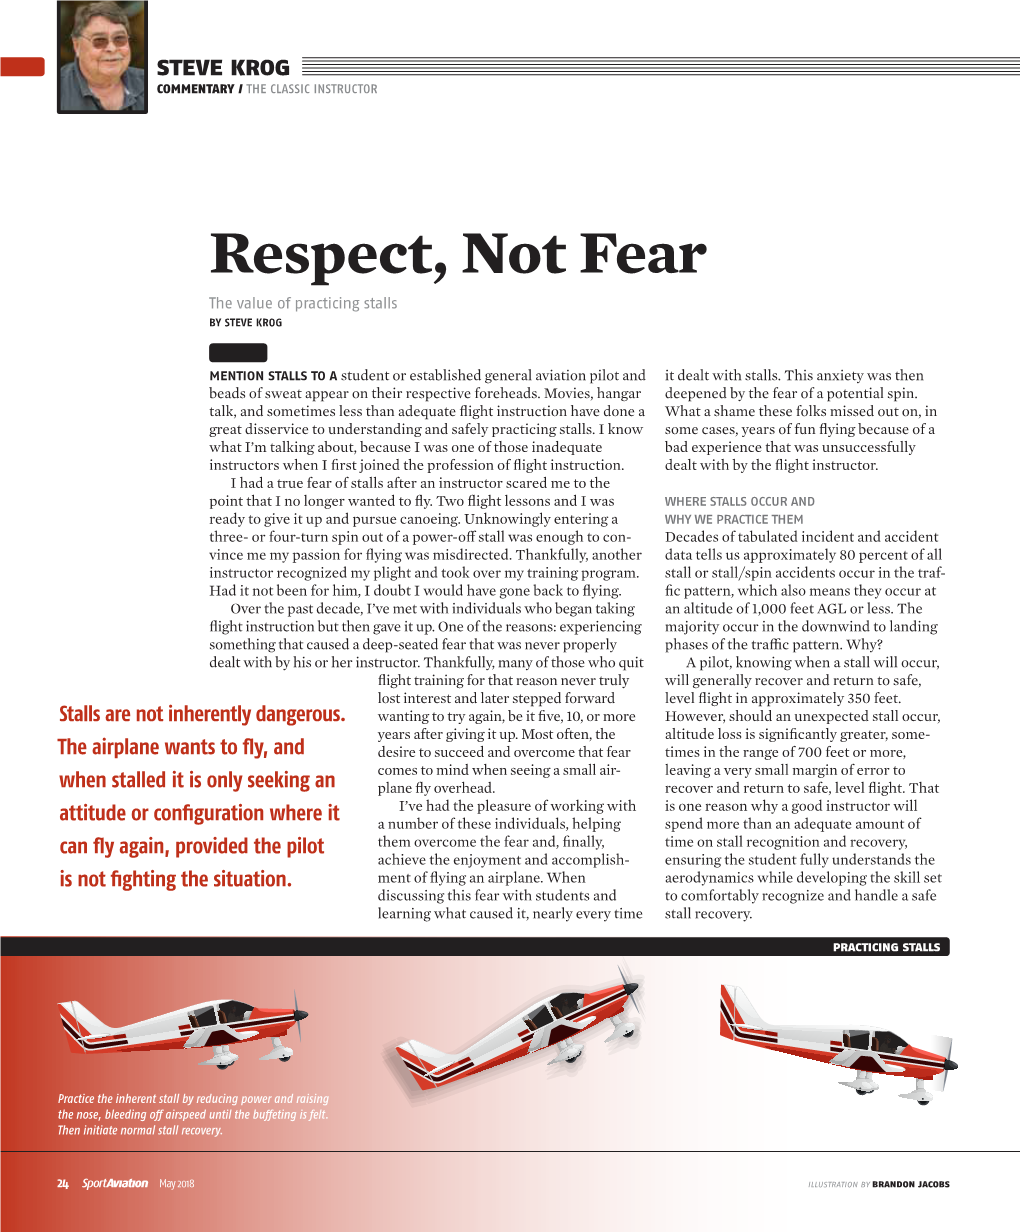 Respect, Not Fear the Value of Practicing Stalls by STEVE KROG